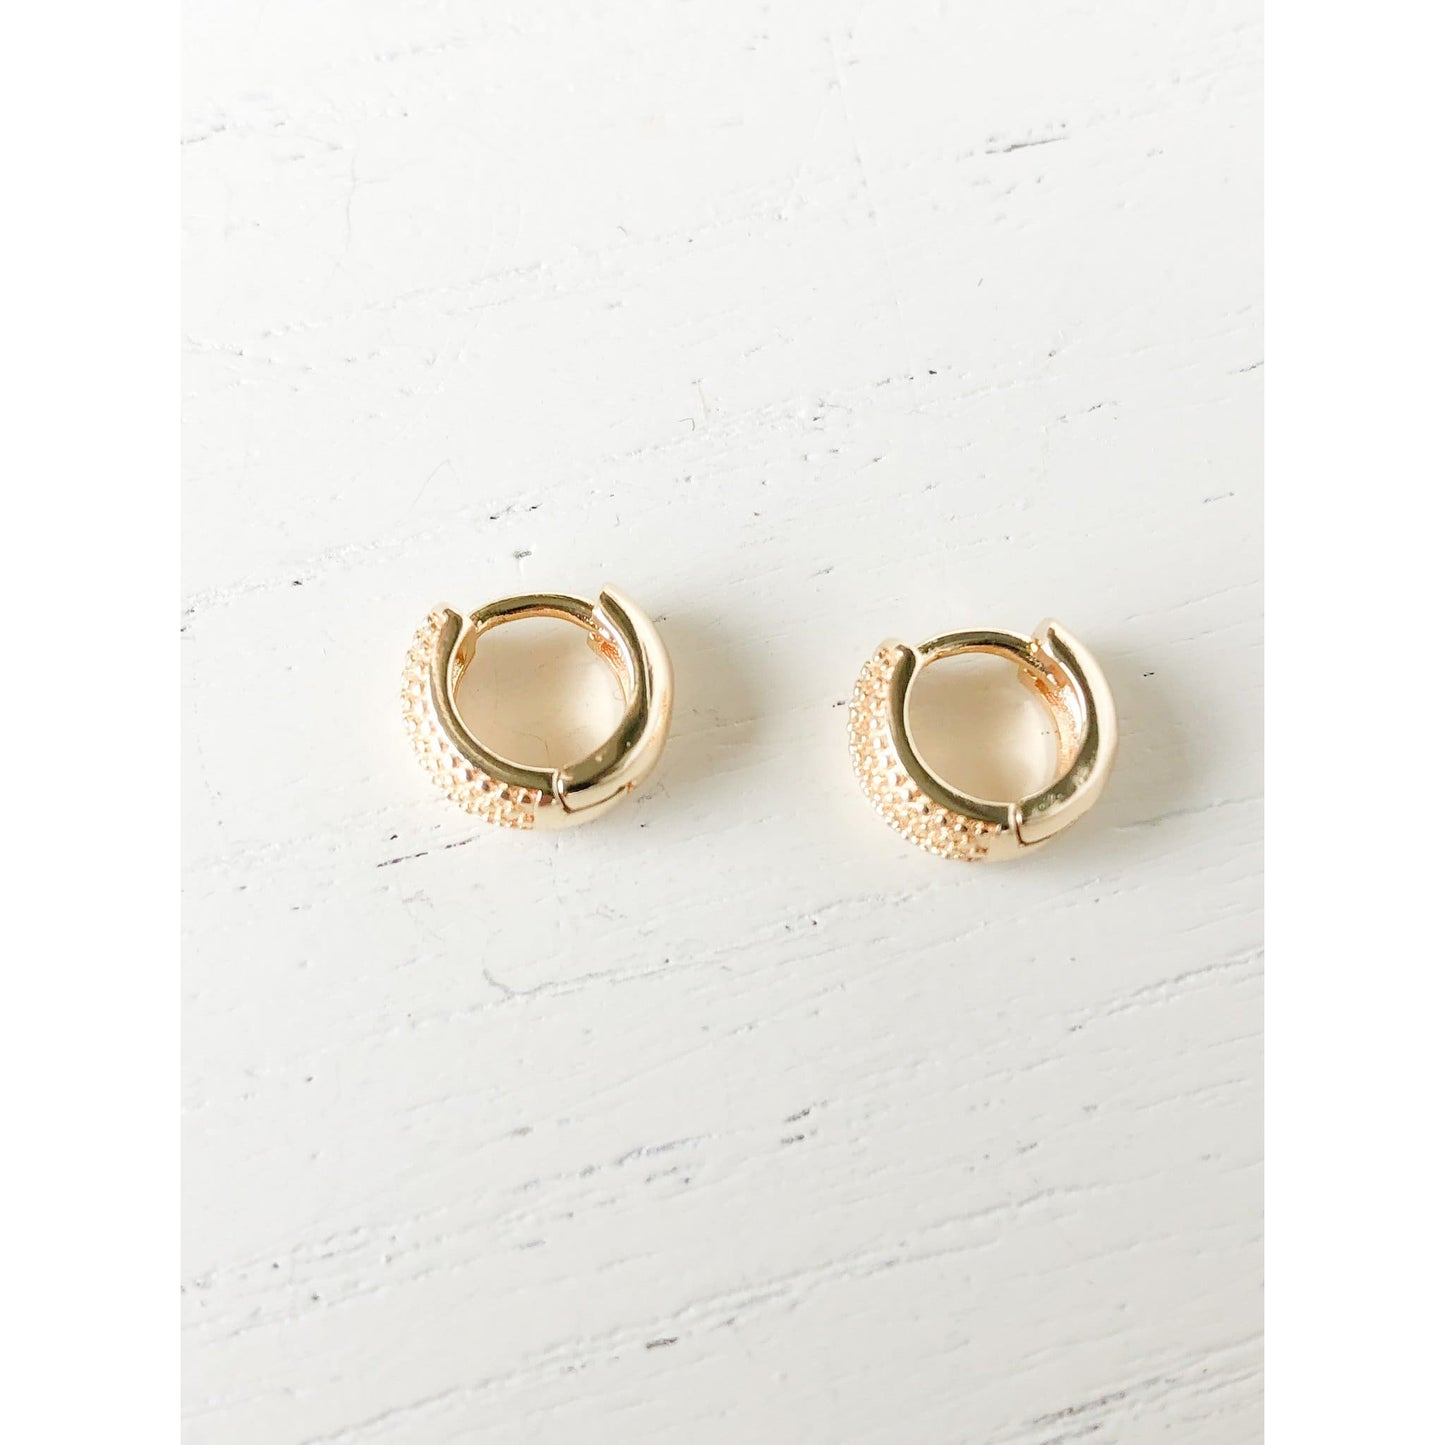 Stoll and Heart - The Gold Textured Huggies - Earrings - The Gold Textured Huggies